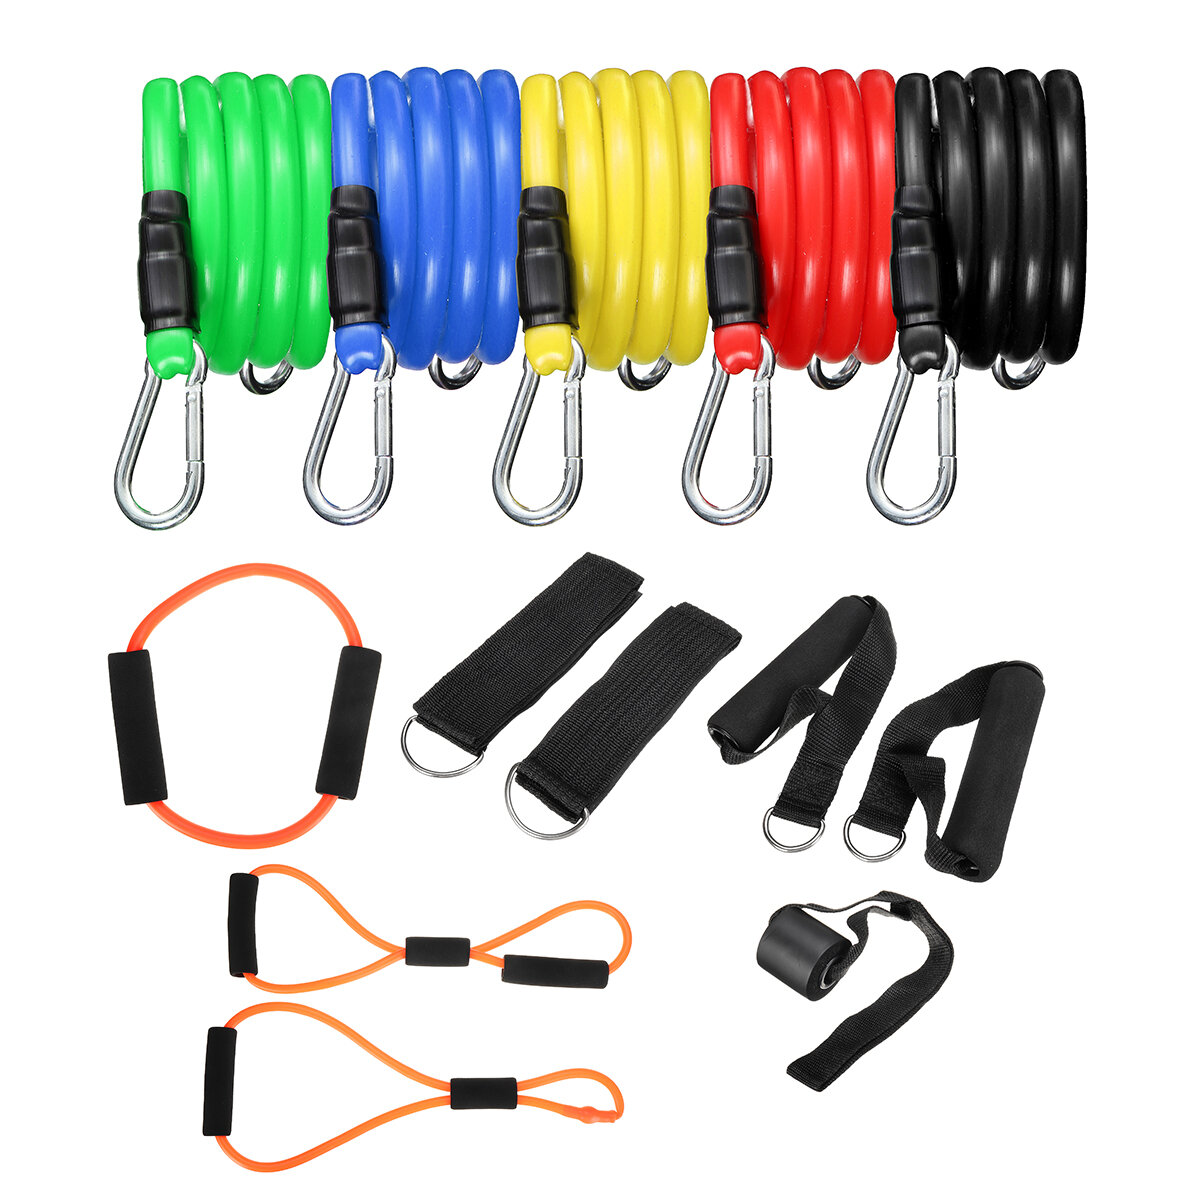 15 Stks Oefening Weerstand Bands Set Fitness Latex Yoga Elastische Band Home Gym Training